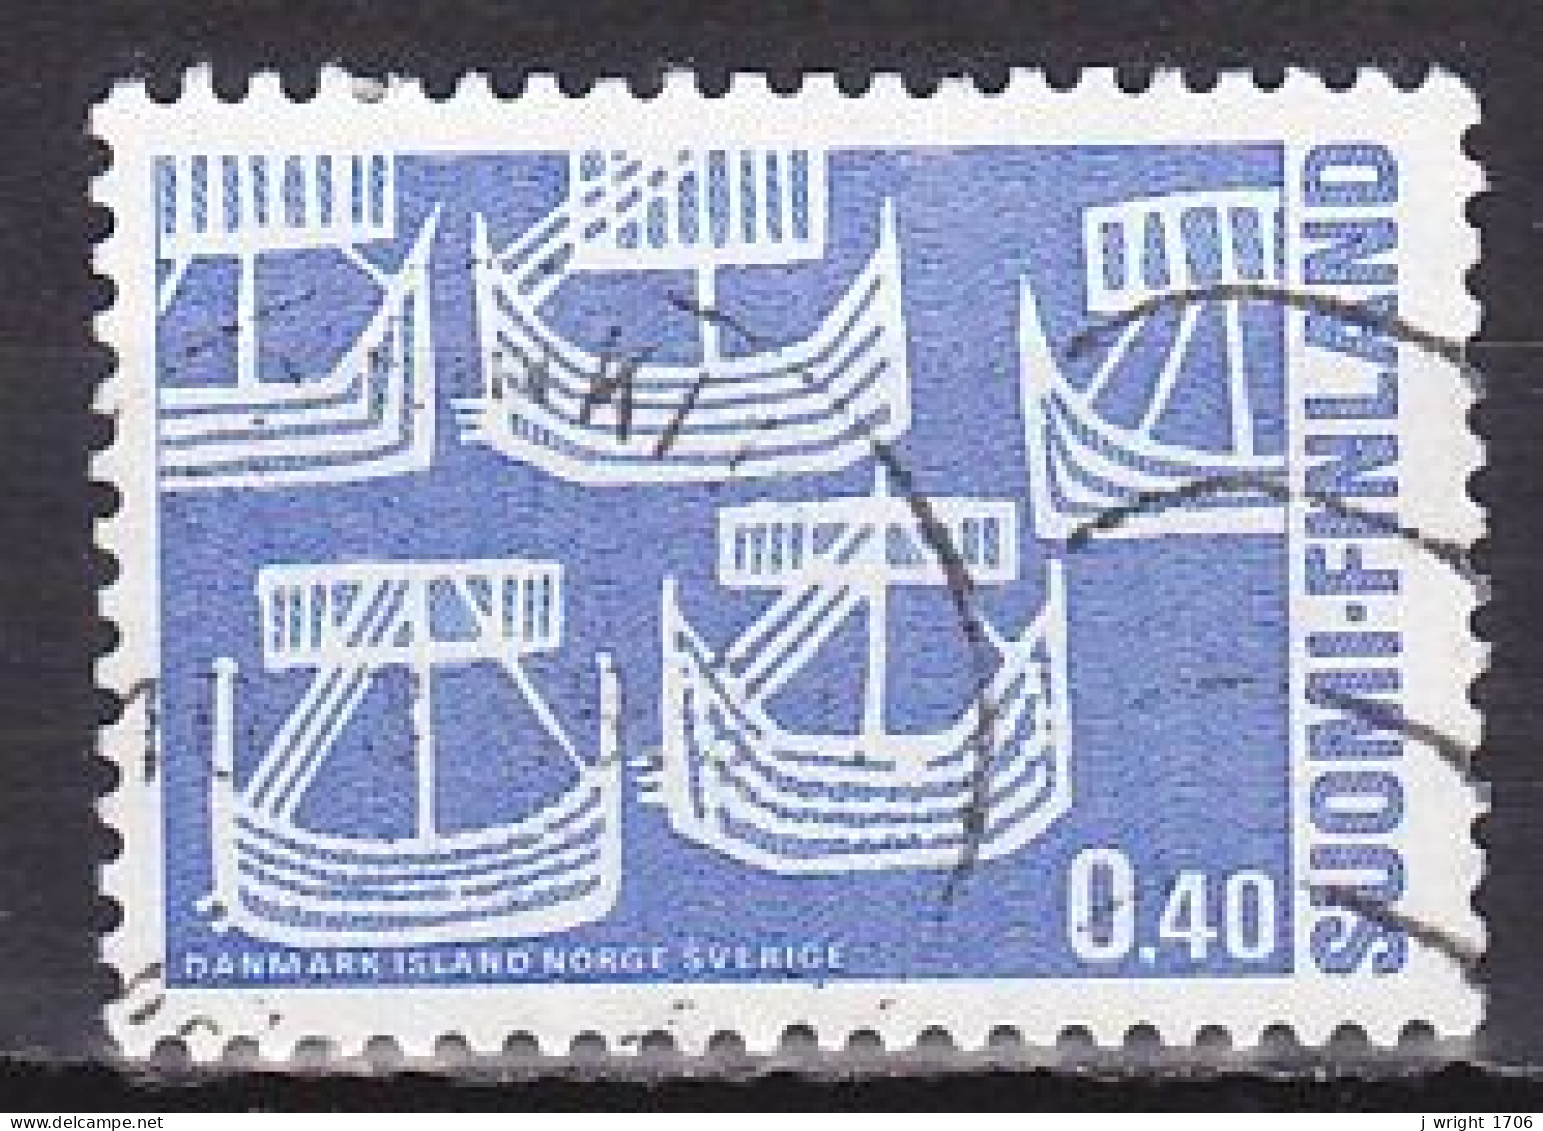 Finland, 1969, Nordic Co-operation Issue, 0.40mk, USED - Gebraucht